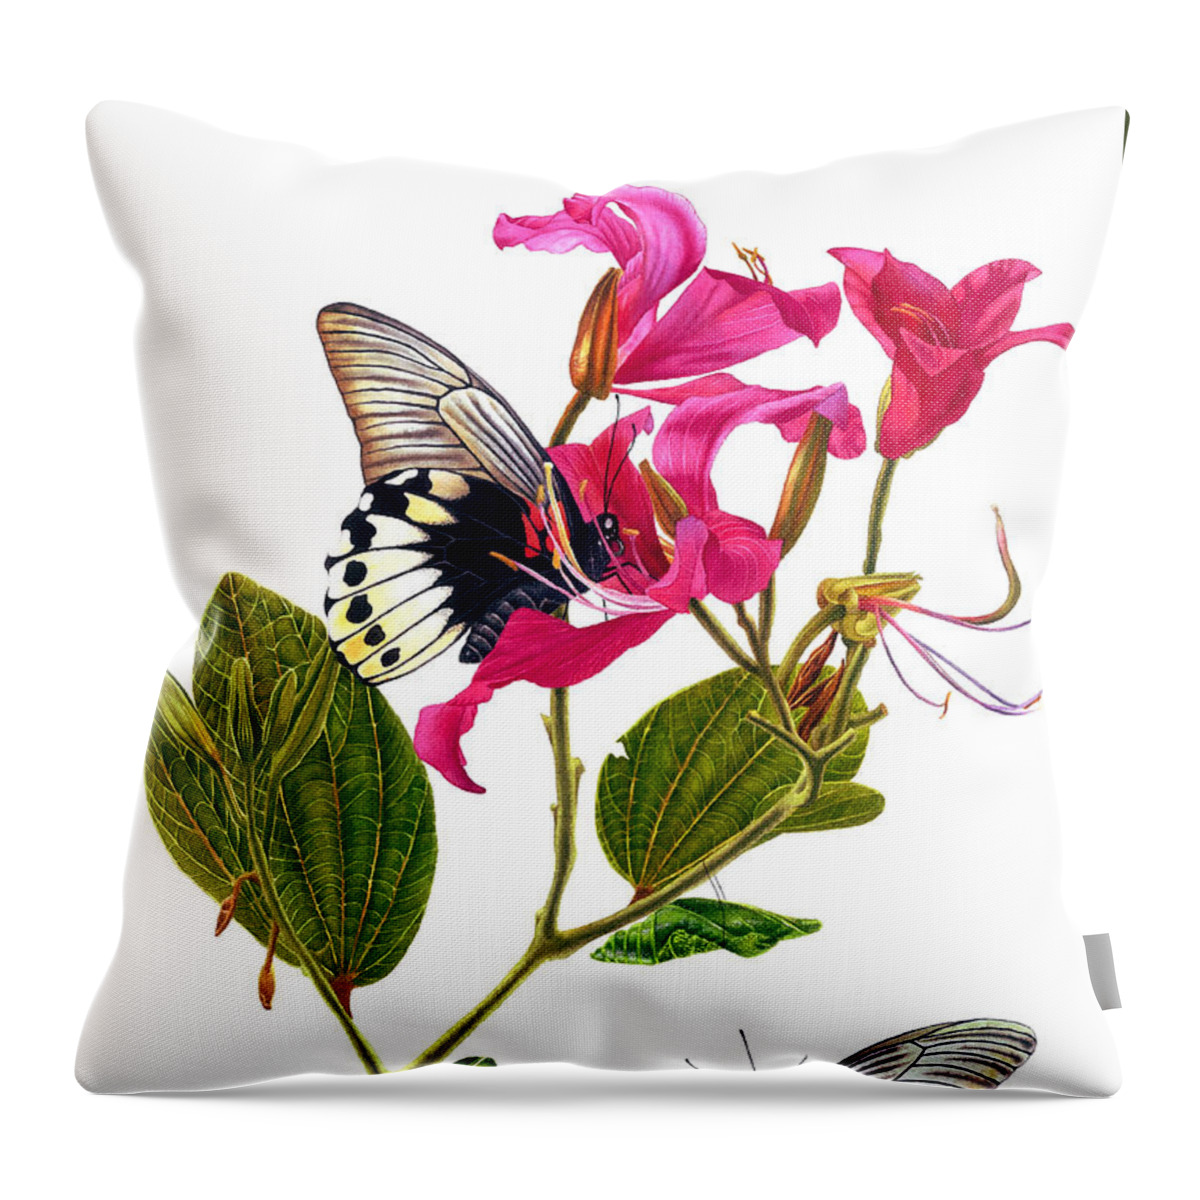 Papilio Memnon Throw Pillow featuring the painting The Great Mormon Butterfly by Espero Art